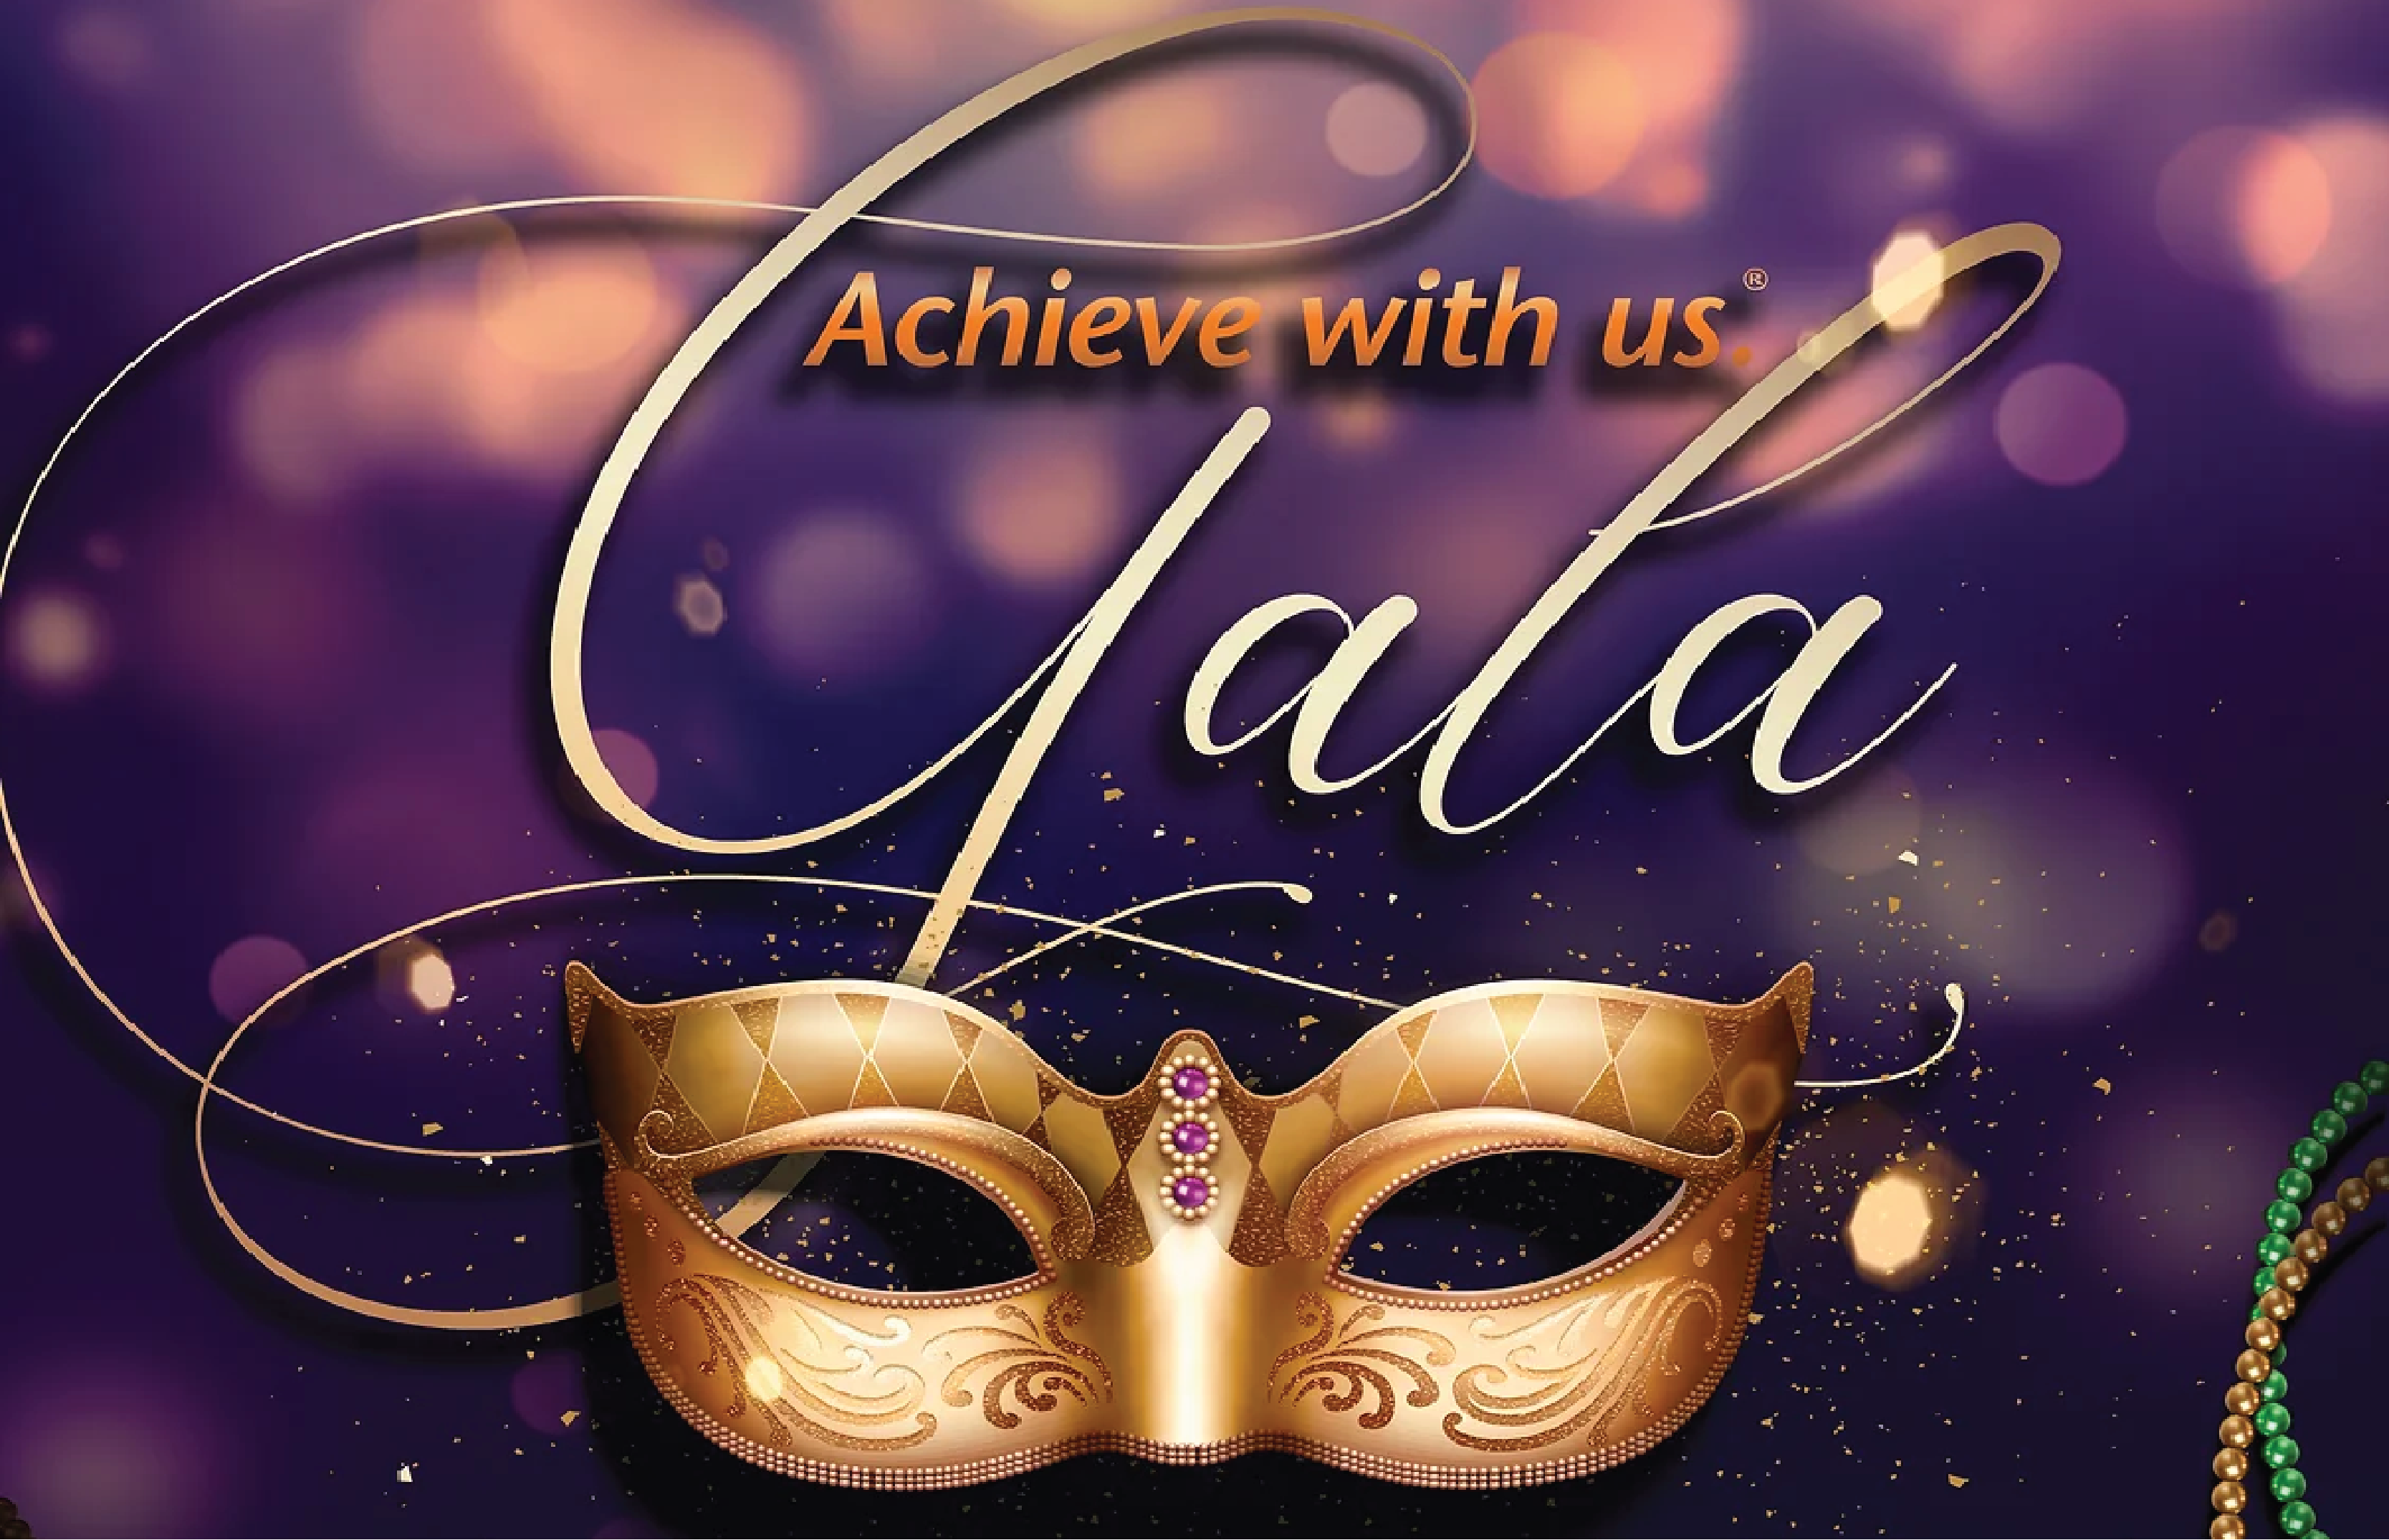 The Arc of Katy to Hold Annual “Achieve with us” Gala in January